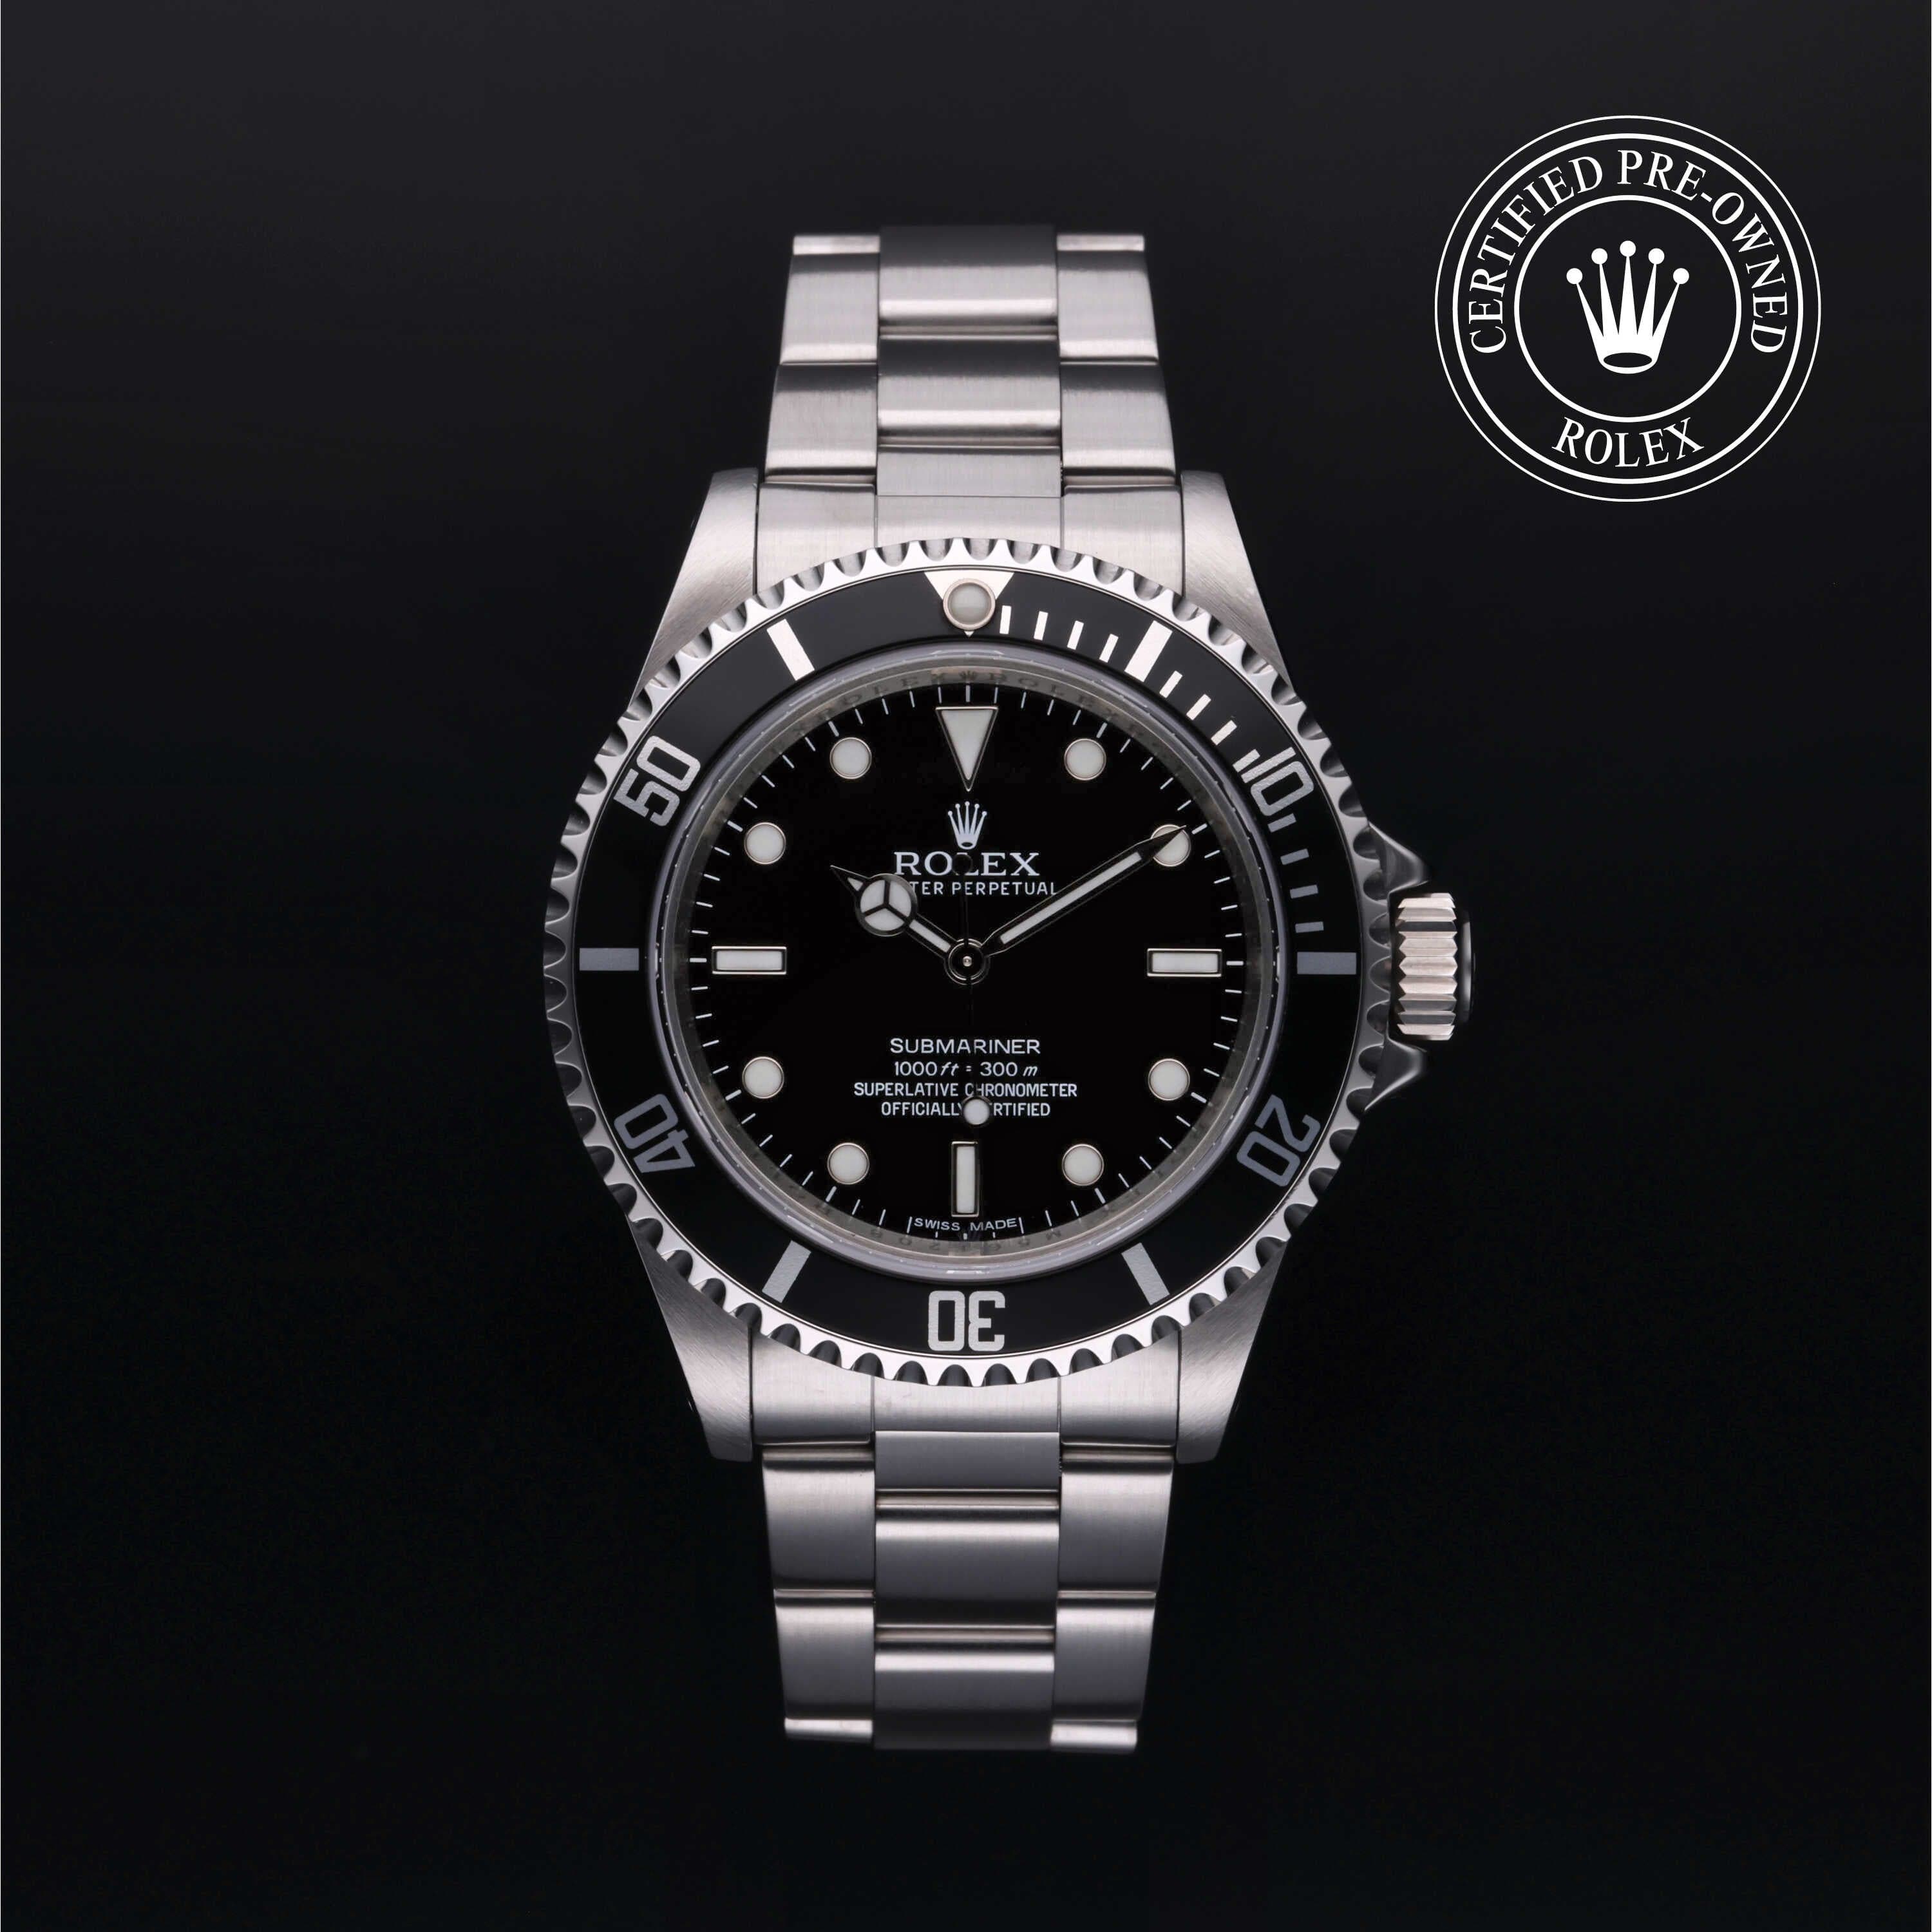 Rolex Certified Pre-Owned Submariner in Oyster, 40 mm, Stainless Steel watch